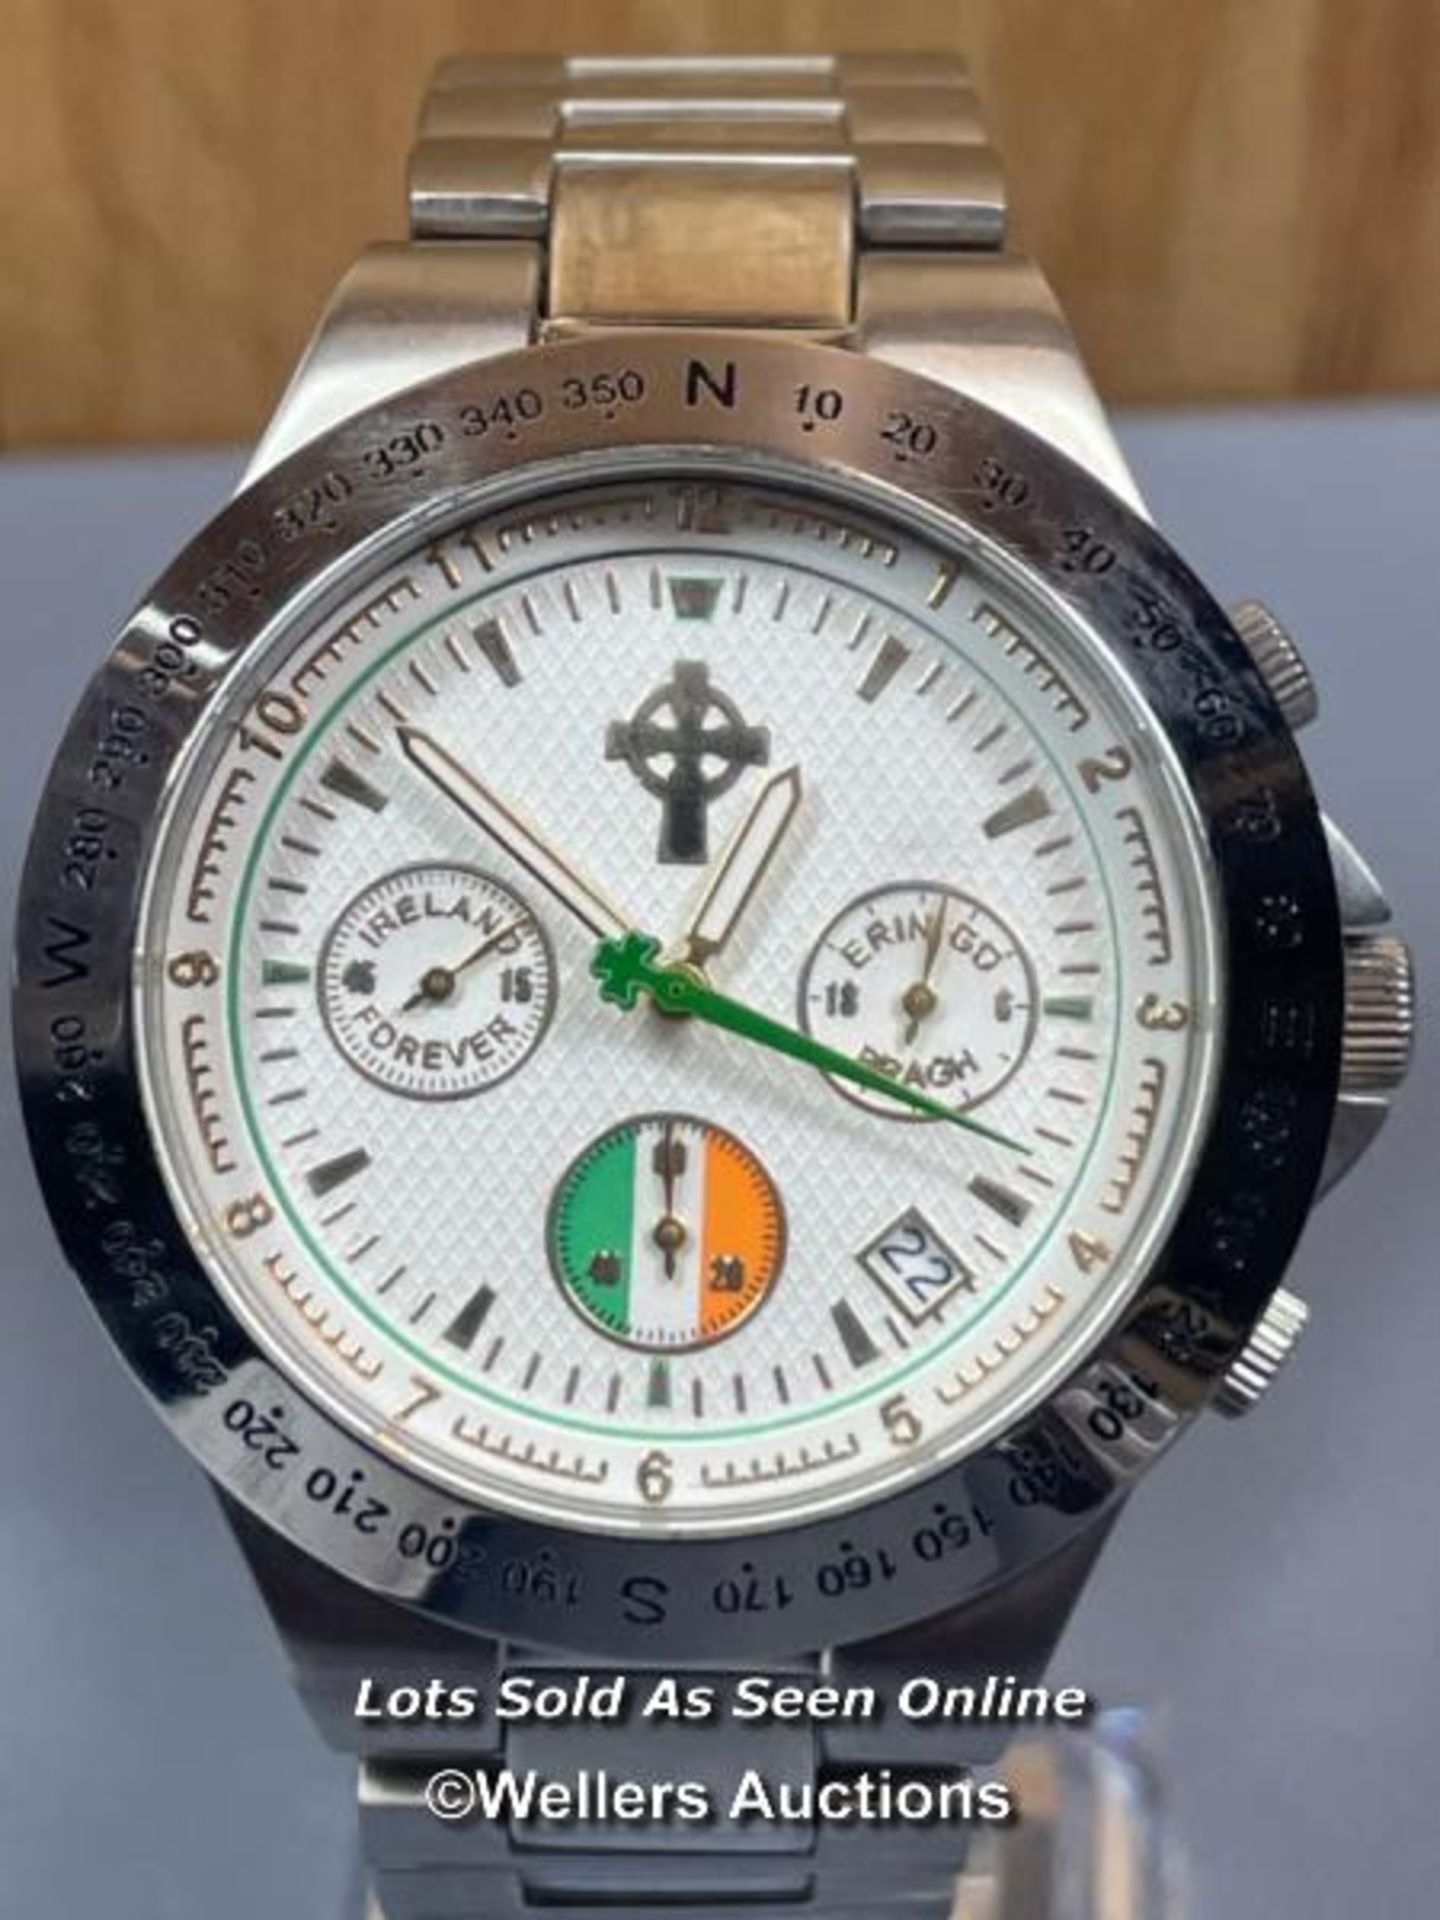 ERIN GO BRAGH GENTS WATCH LIMITED EDITION NO.1372 / 4999, GUINESS LOGO ON THE BRACELET